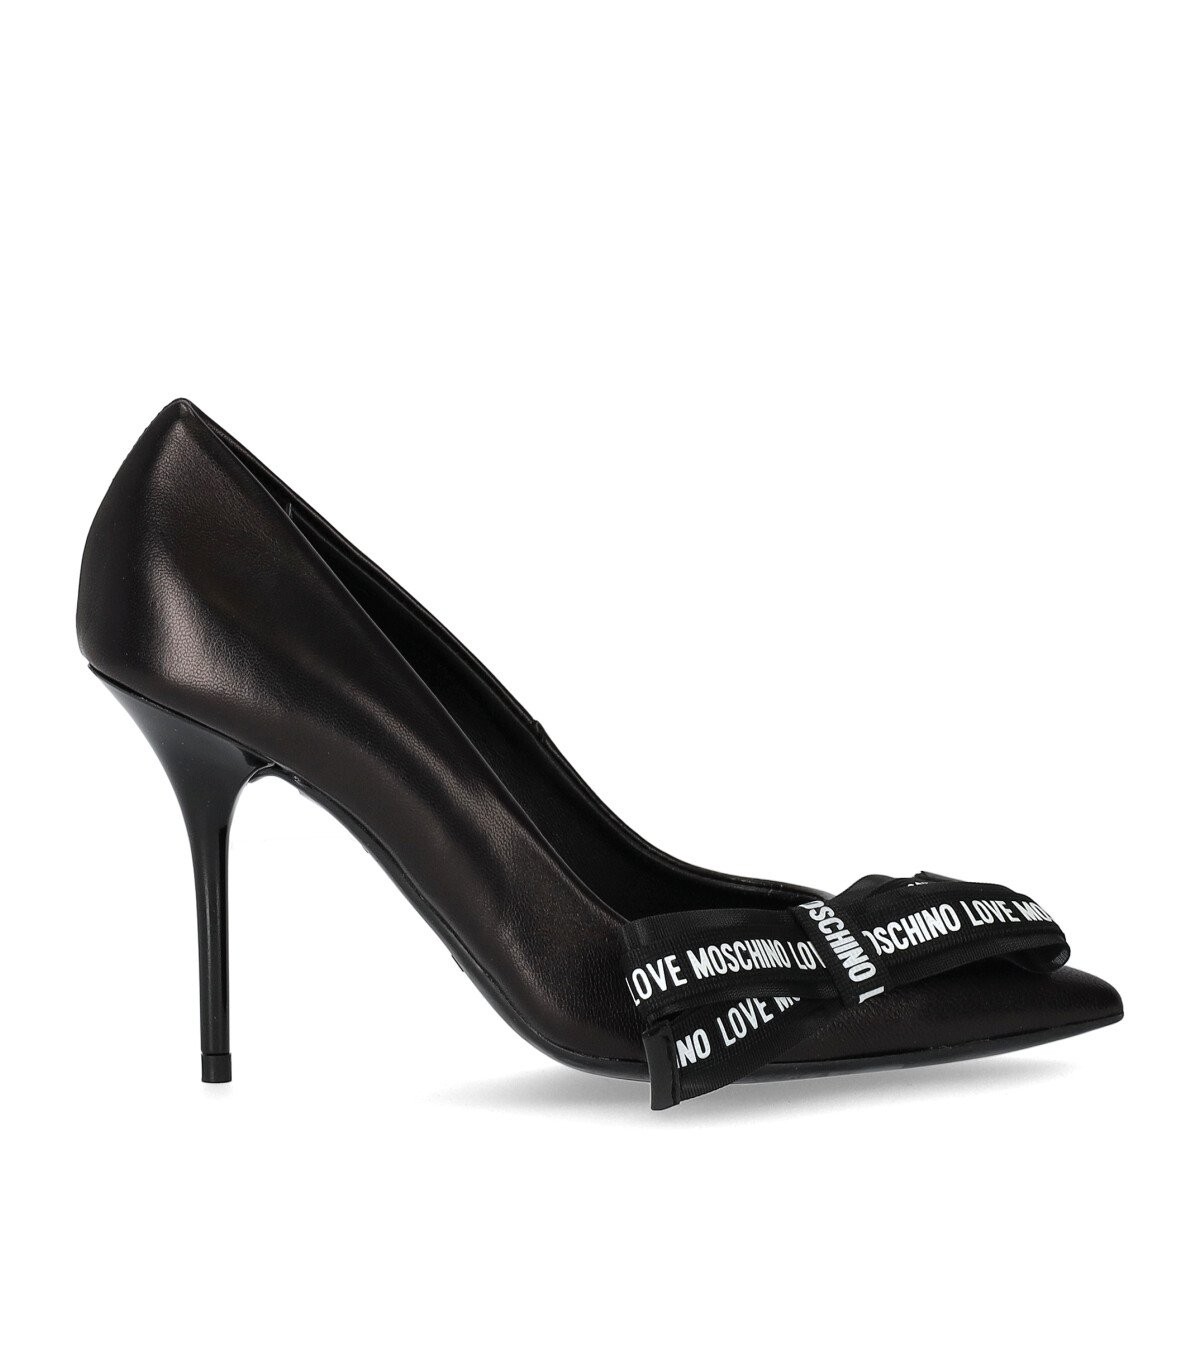 LOVE MOSCHINO BLACK PUMP WITH BOW